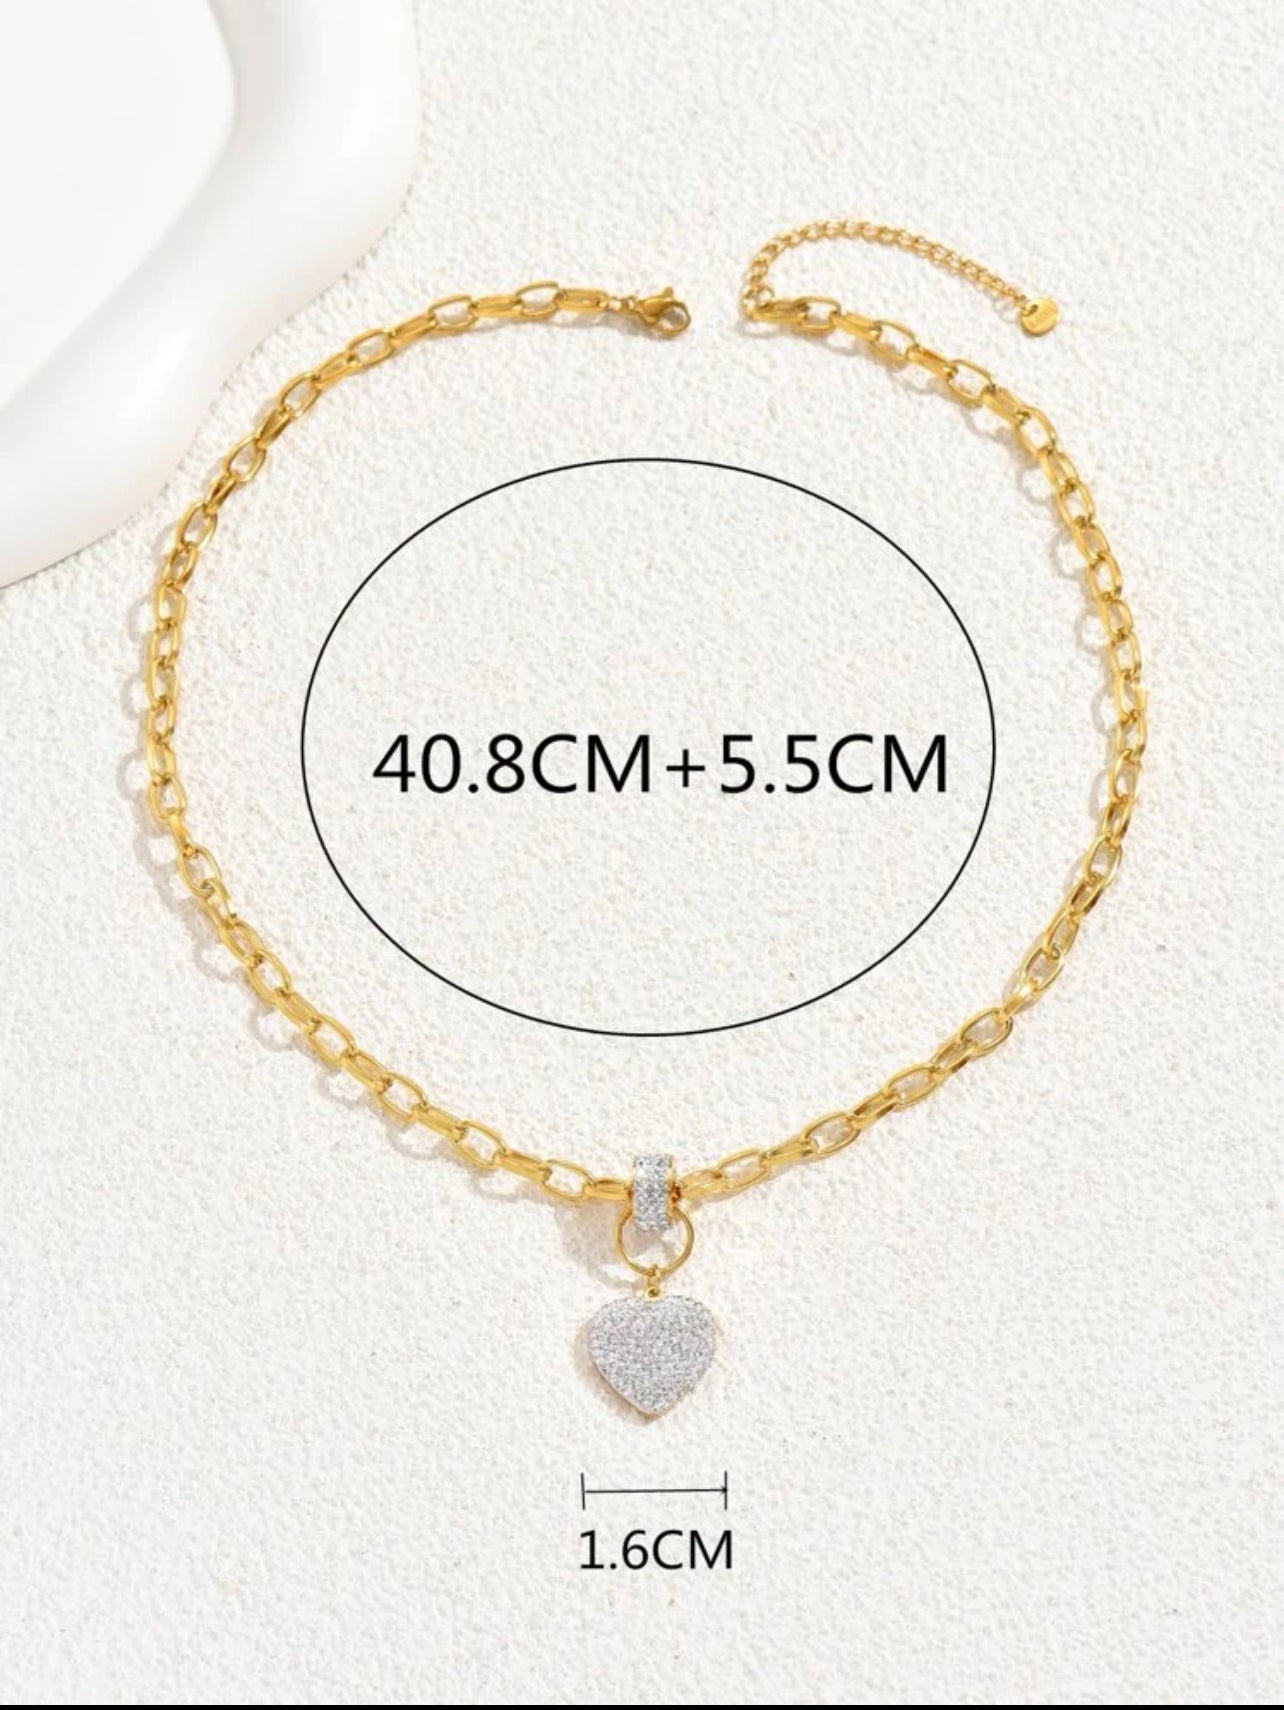 Zuri Gold Choker stainless steel necklace with CZ Diamond heart Pendant Necklace for women. 18K Z115